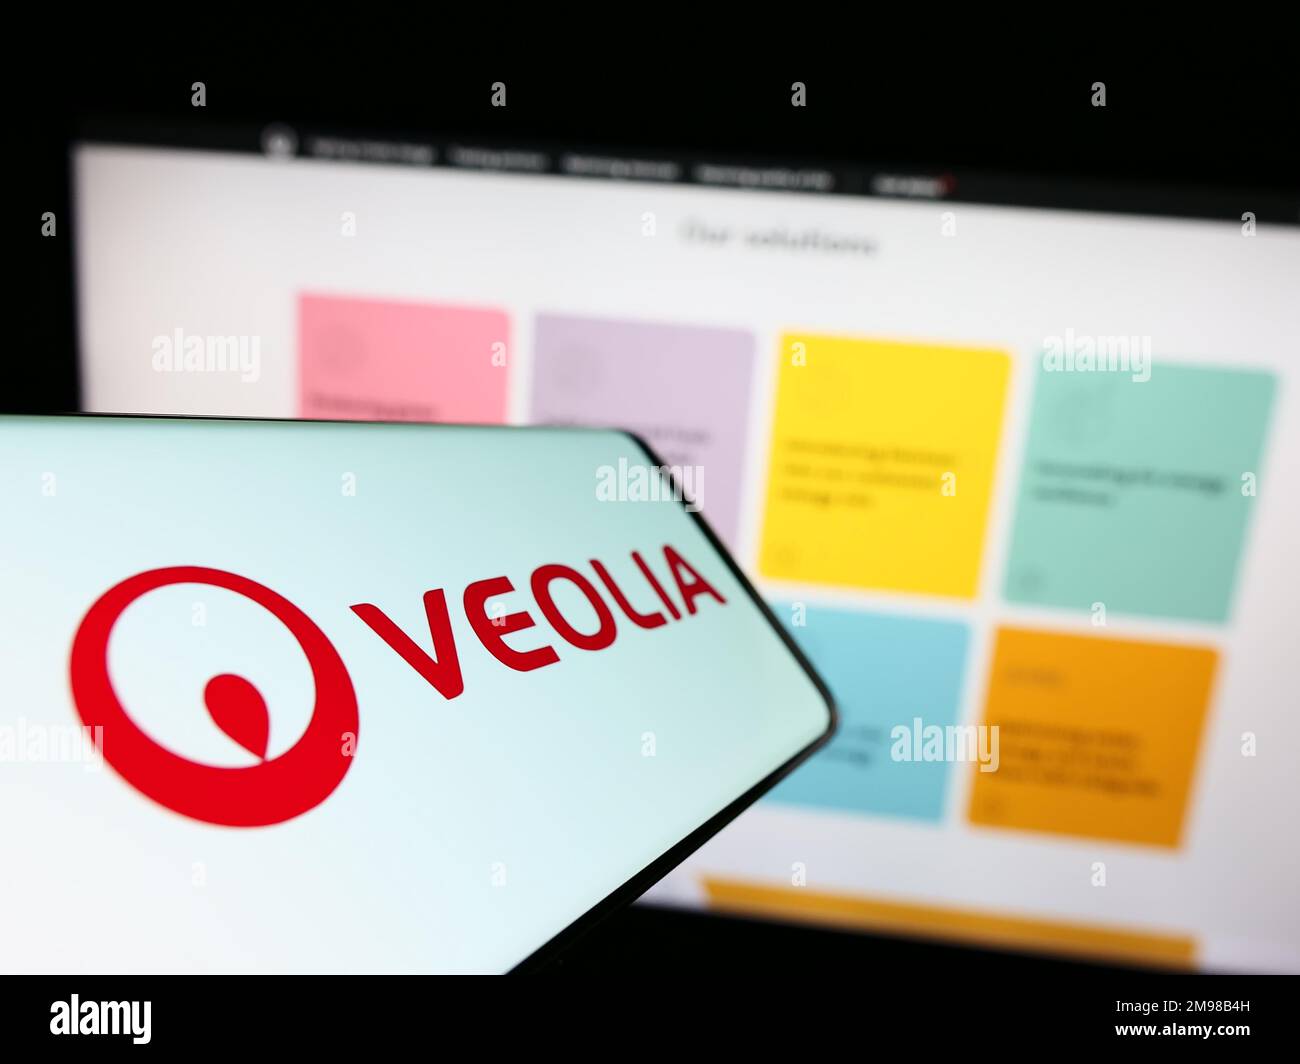 Smartphone with logo of French company Veolia Environnement SA on screen in front of business website. Focus on center-left of phone display. Stock Photo